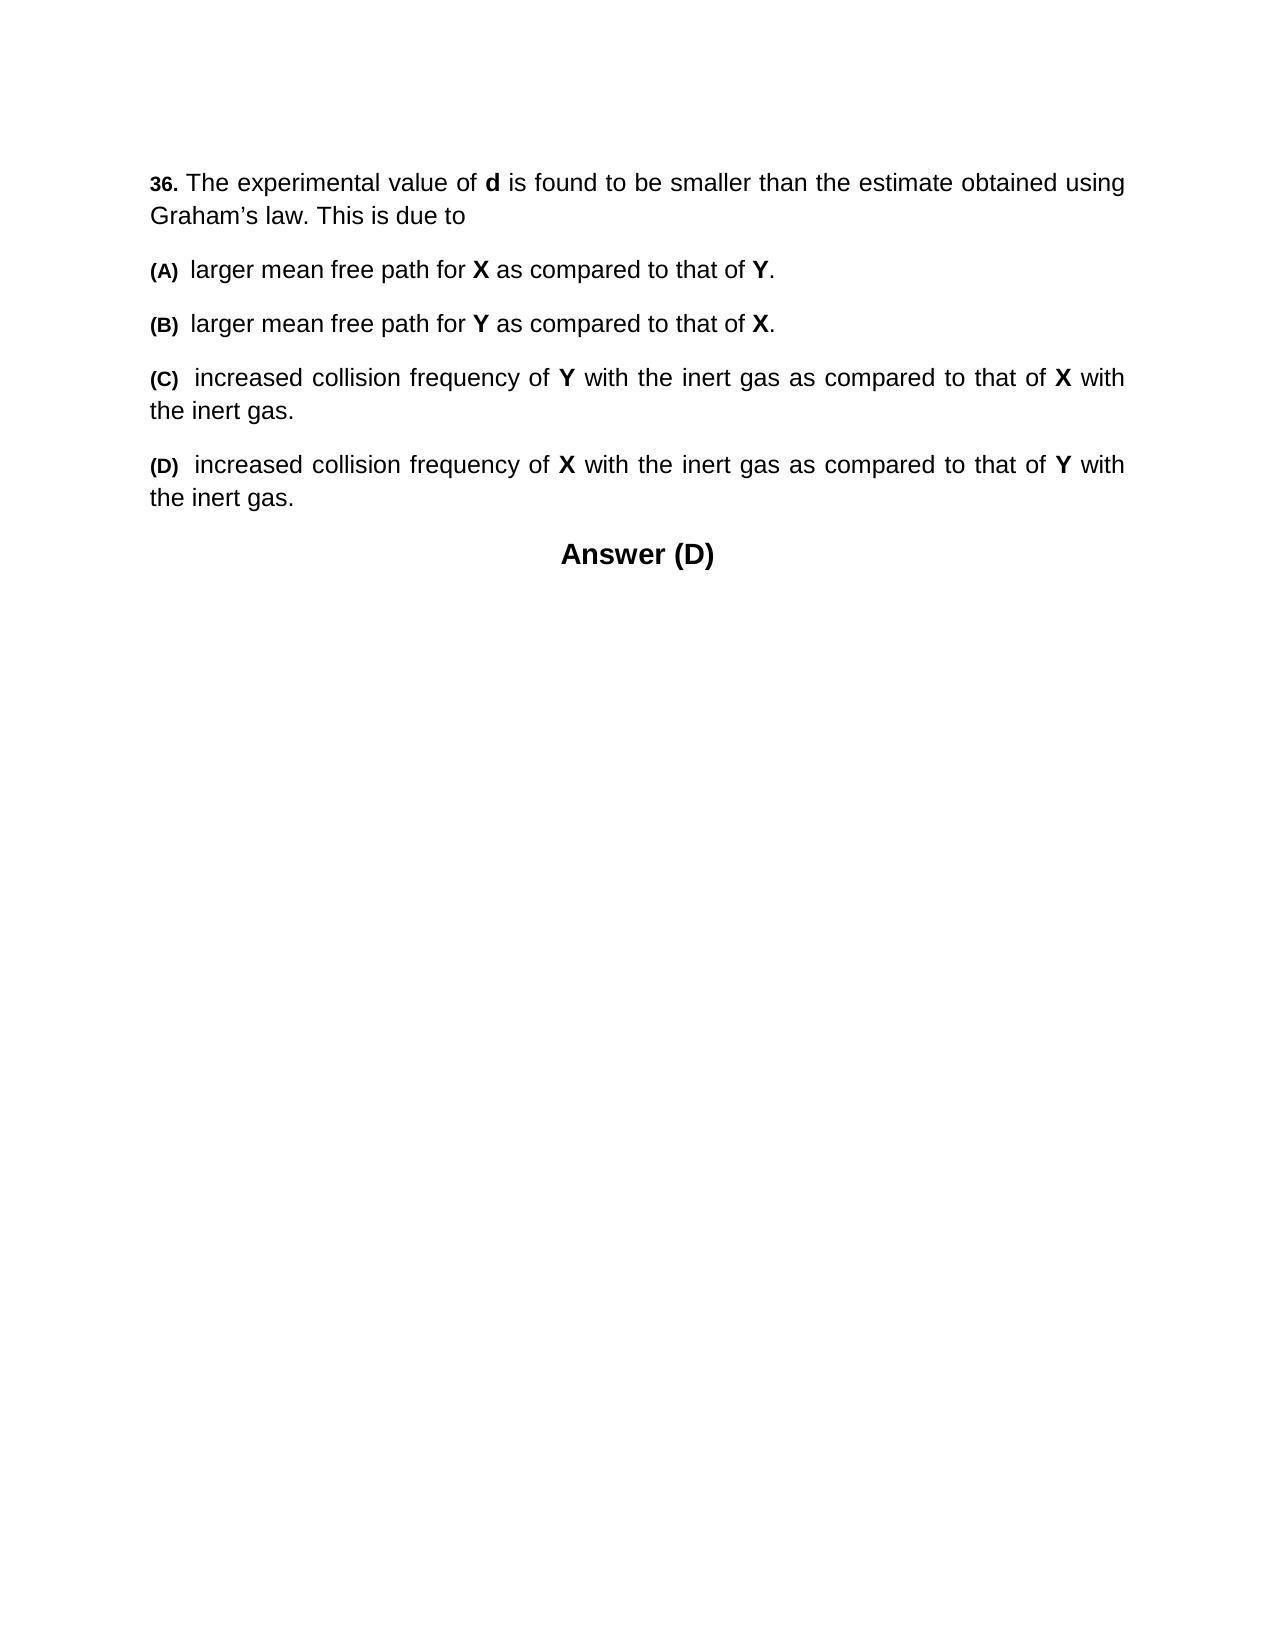 JEE (Advanced) 2014 Paper II Question Paper - Page 24